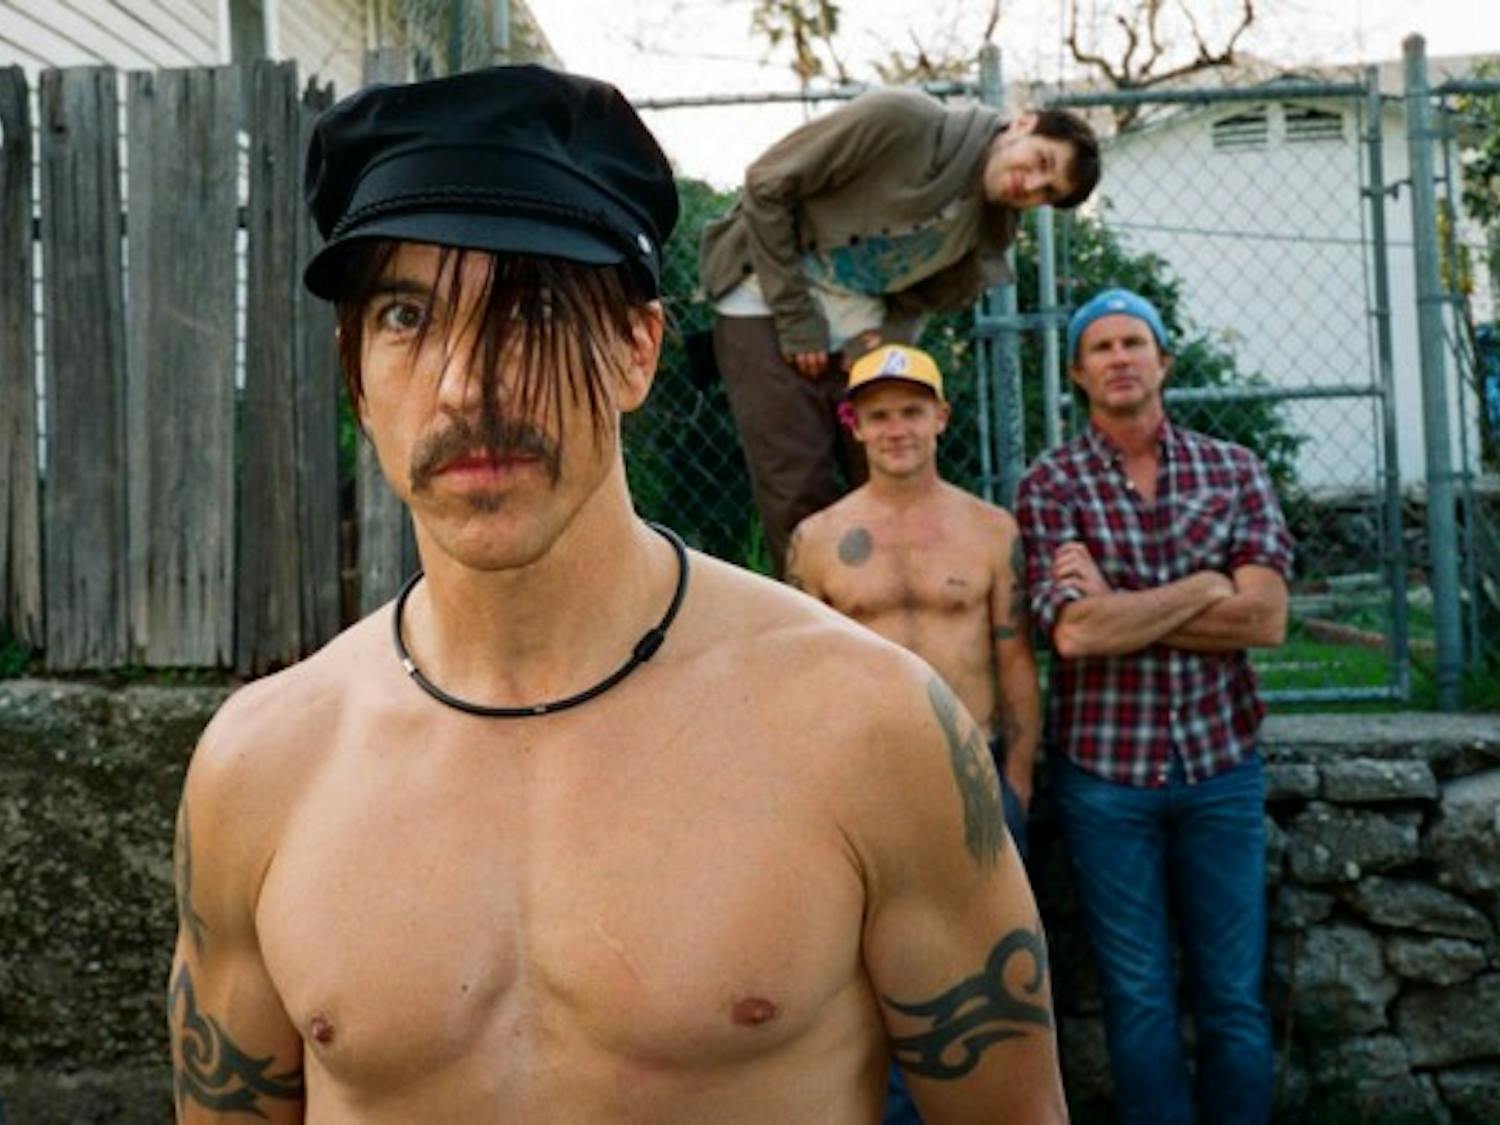 The beginning of the Red Hot Chili Peppers U.S. tour will kick off in Tampa Bay on March 29 at the Tampa Bay Times Forum.